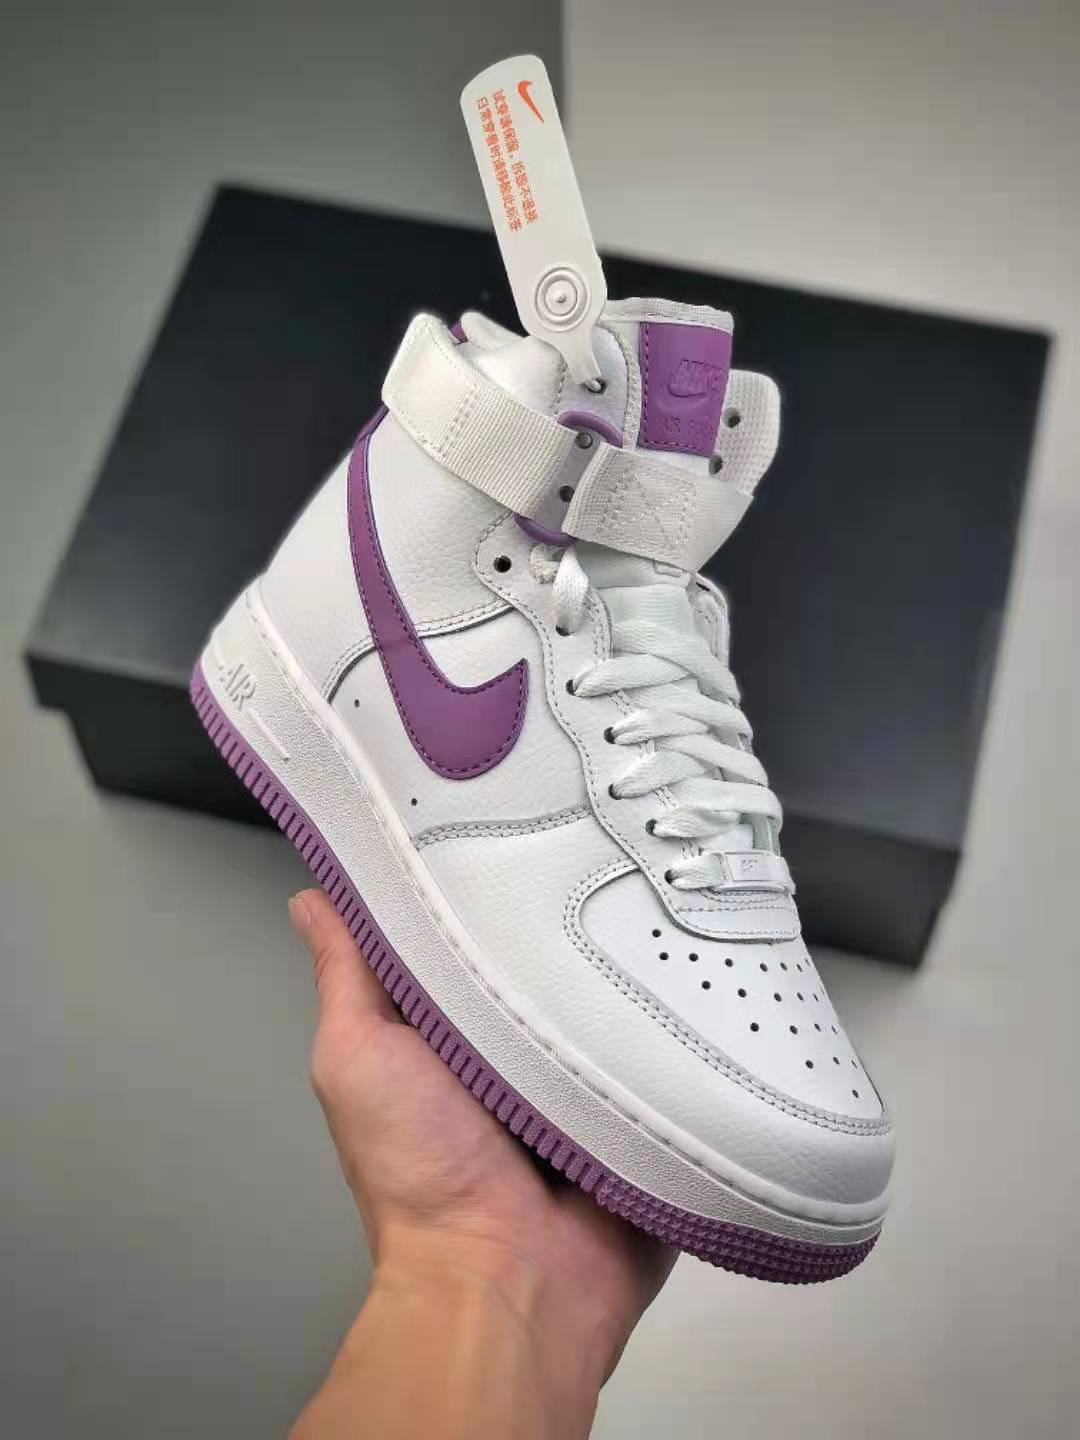 Nike Air Force 1 High White Dark Orchid 334031-112 - Stylish Sneakers for Sale